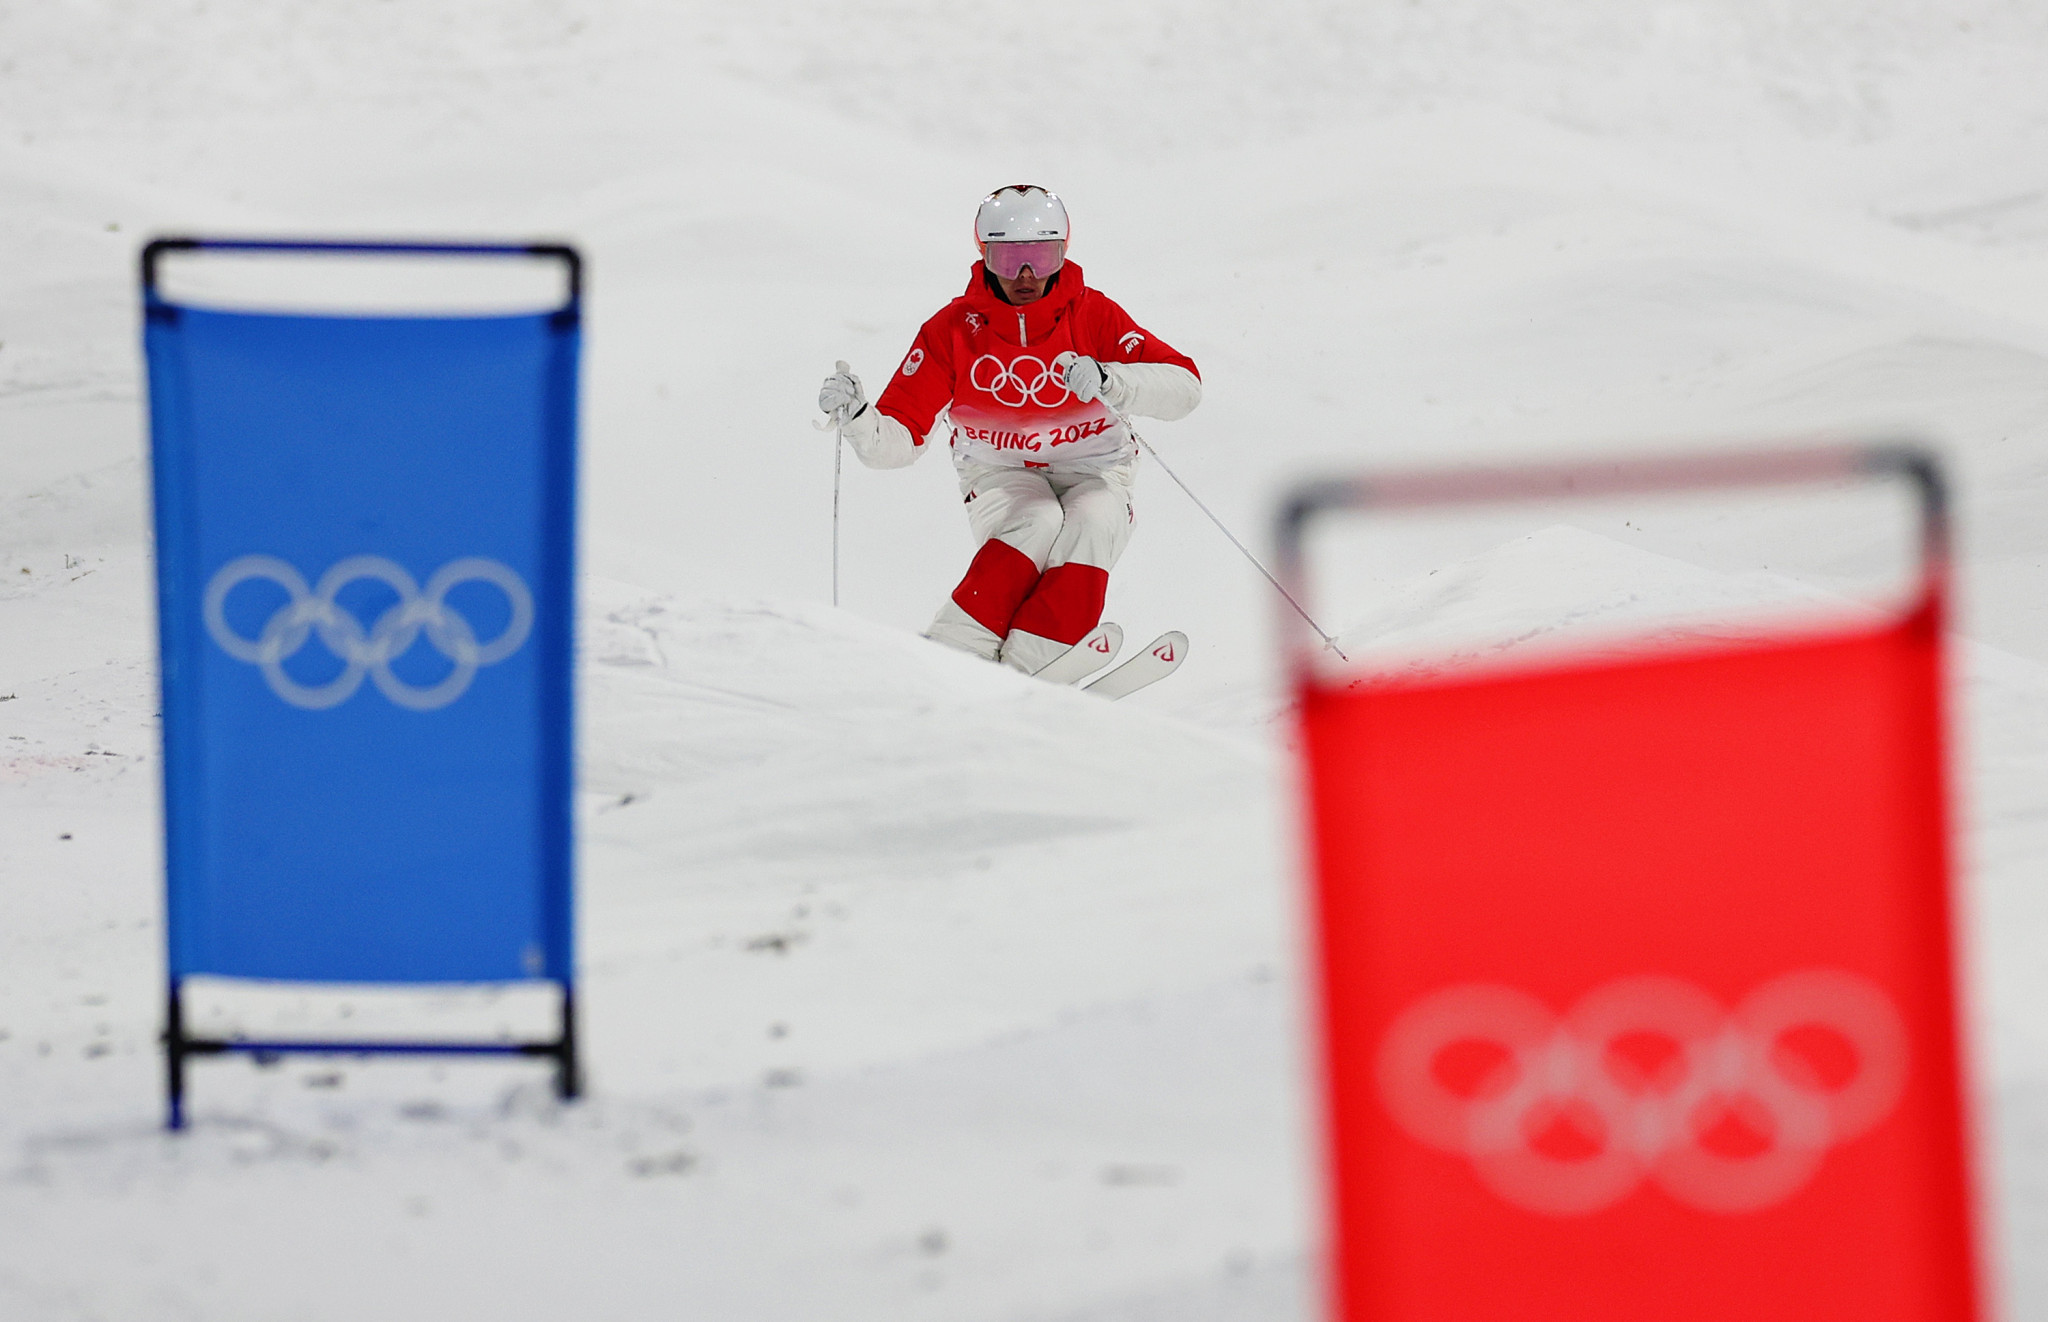 Mikaël Kingsbury won the third Olympic moguls medal of his career ©Getty Images